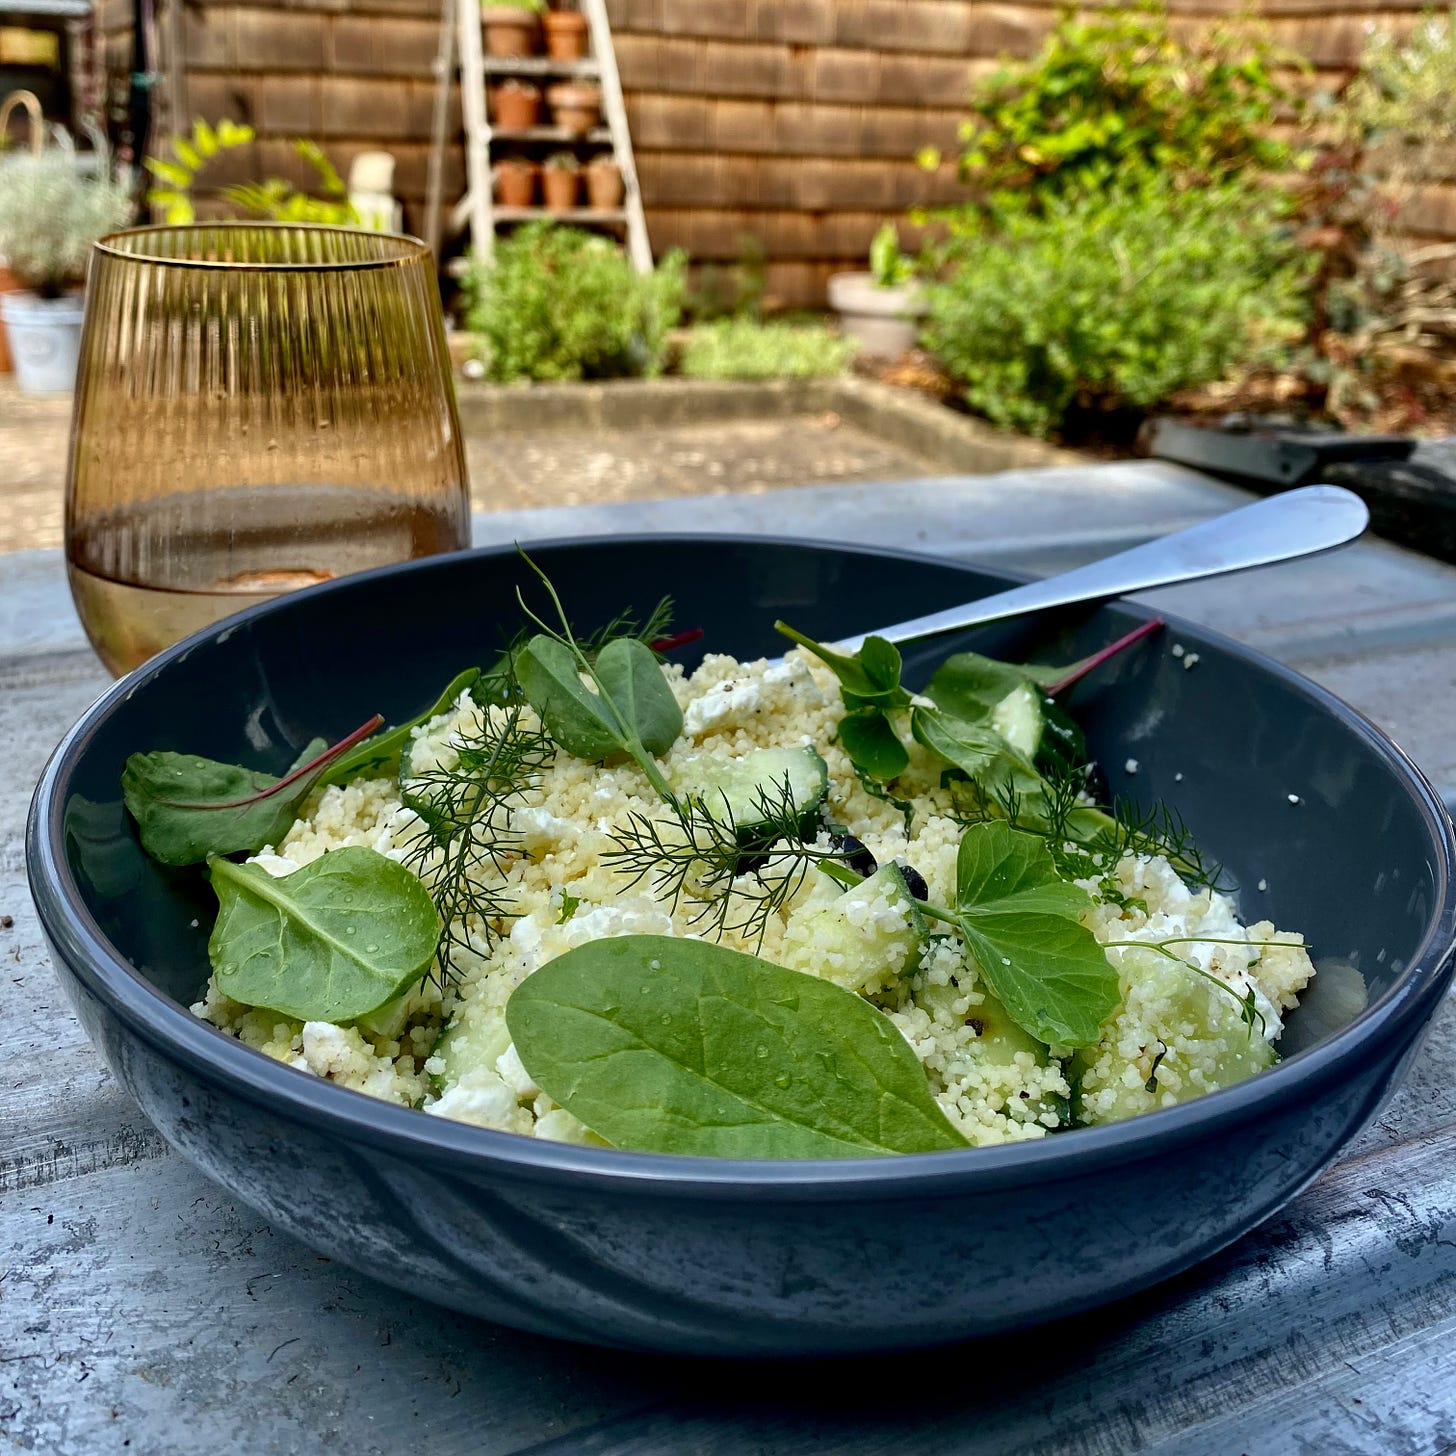 Bowl of couscous salad with feta and mint, scattered with salad leaves and herbs. Bowl is on a metal surface in the garden with a glass to the side and a fork in the bowl